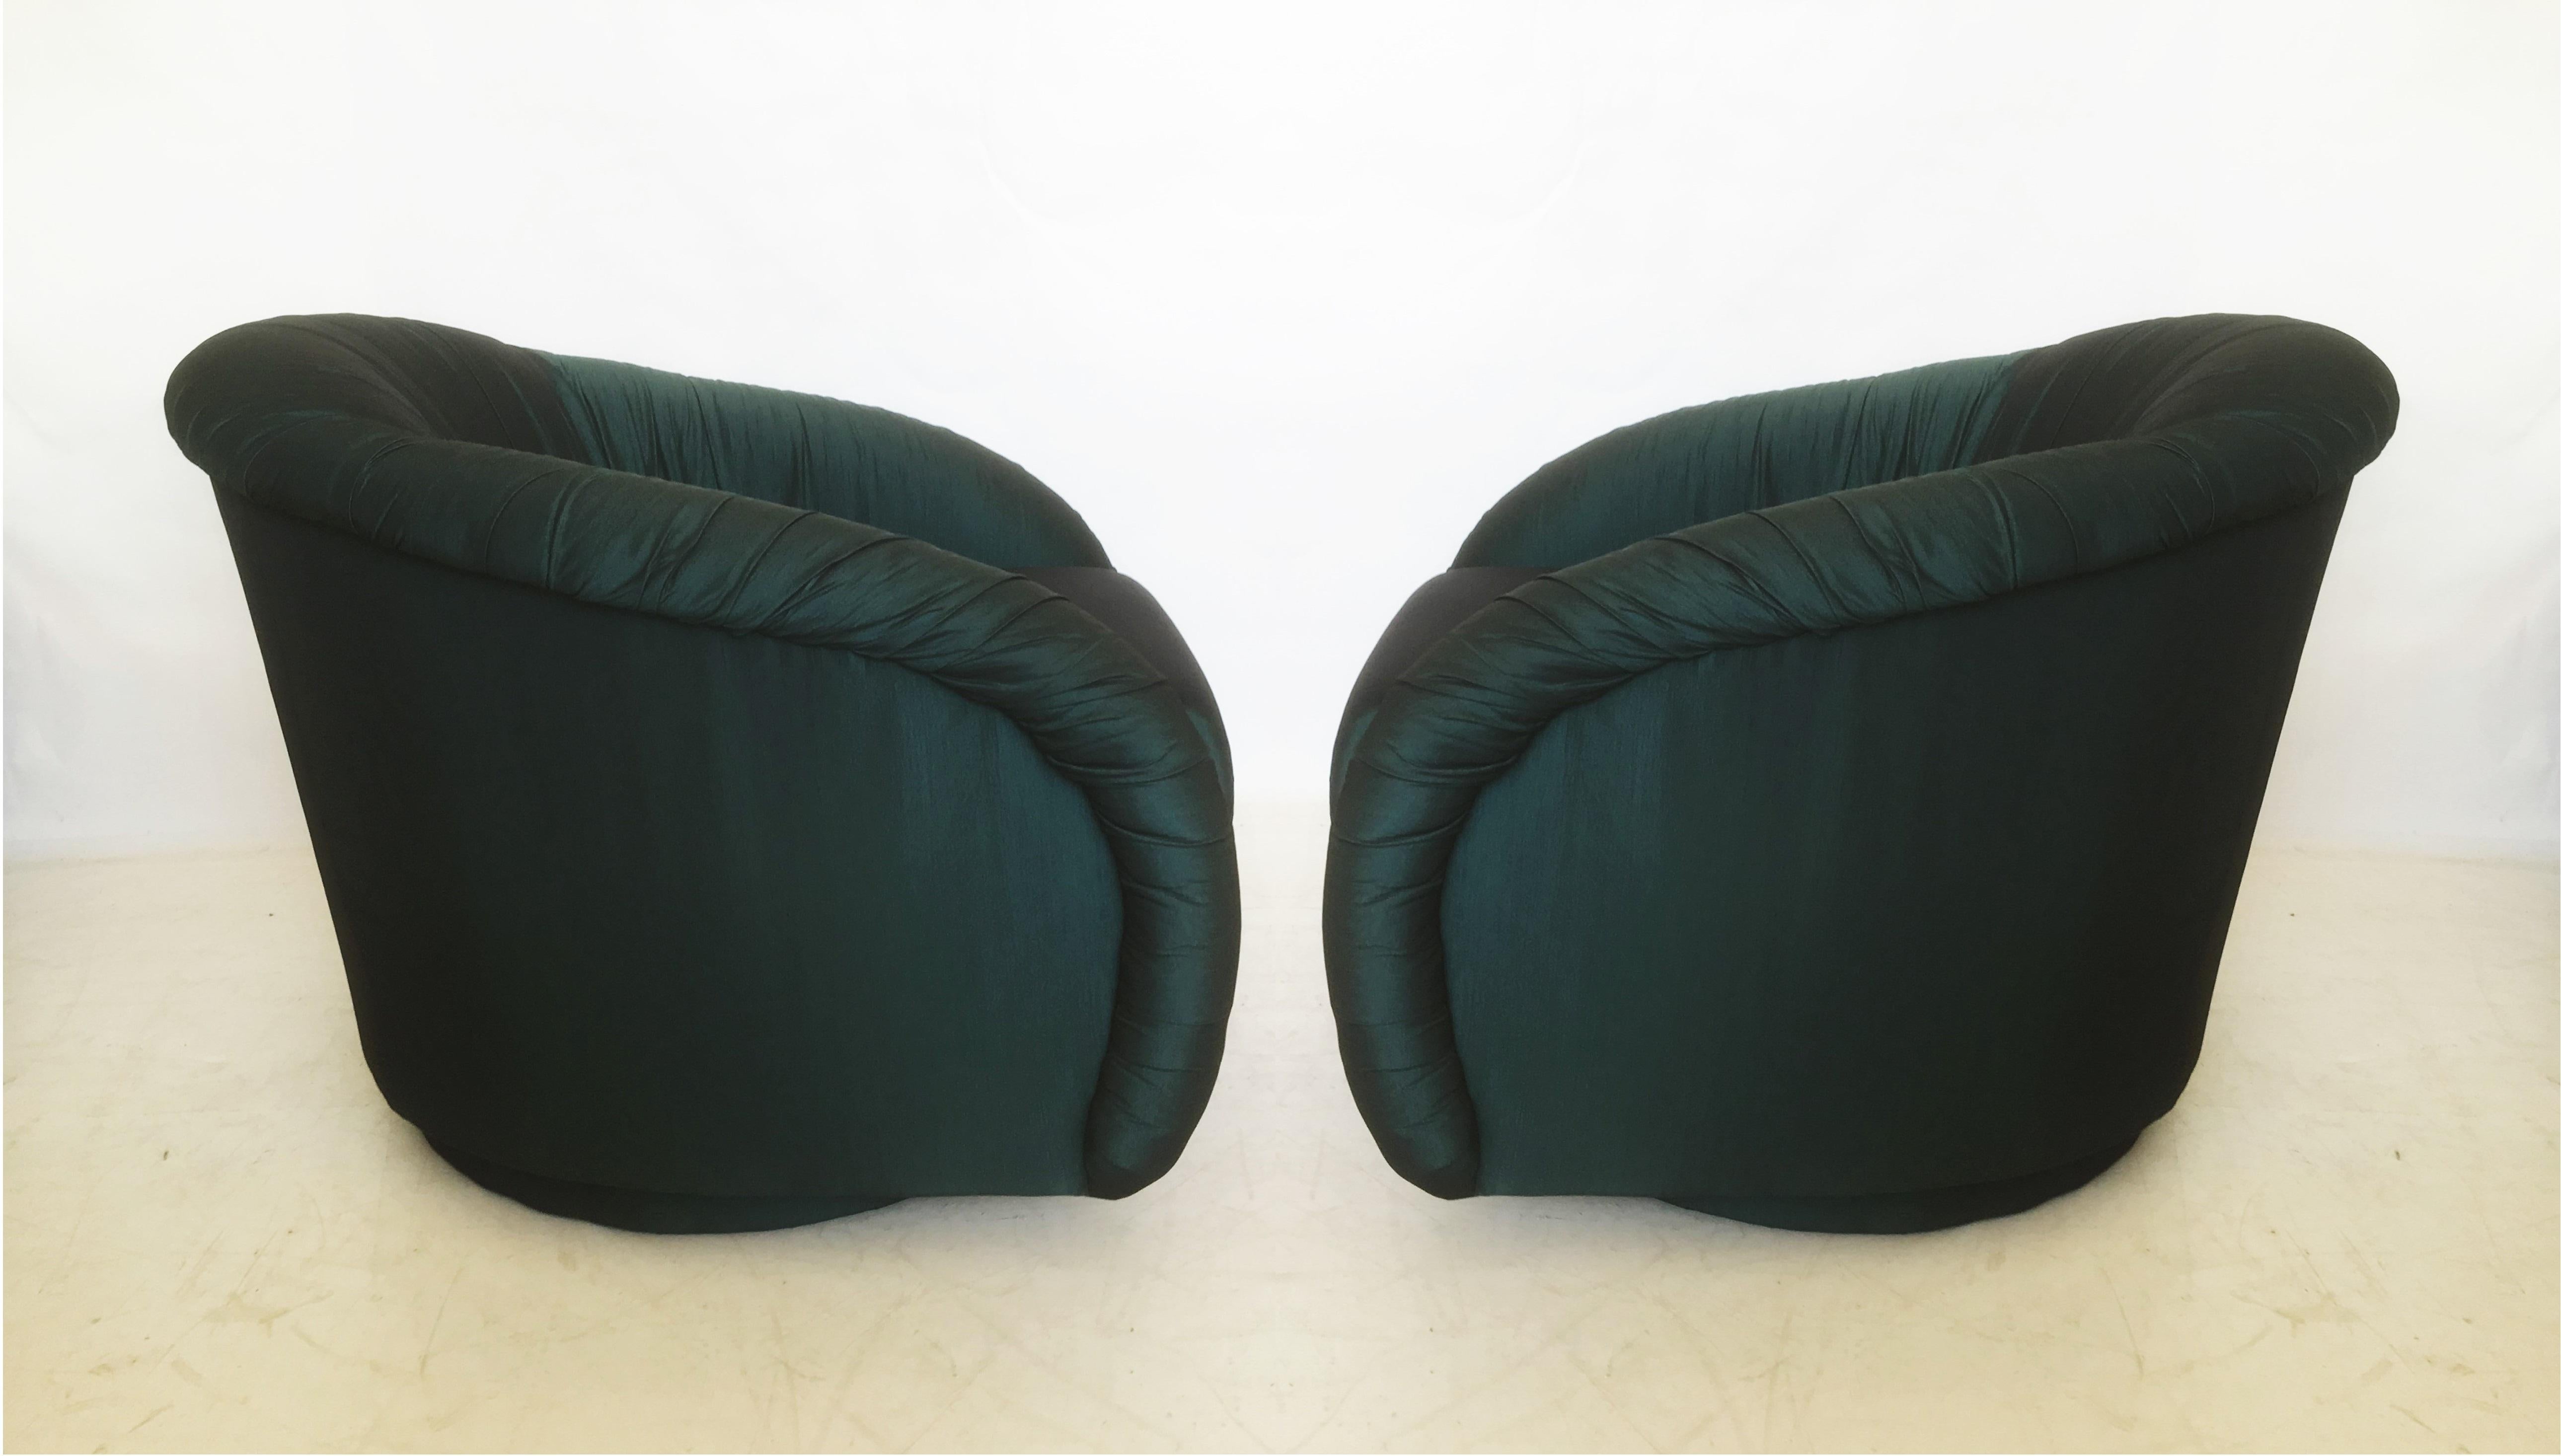 Matching pair of stylish and very comfortable lounge chairs, Milo Baughman Style from the early 1980s. Each custom upholstered swivel chair, barrel back style, covered in a gorgeous green fabric. The backs of the chairs are upholstered in a solid